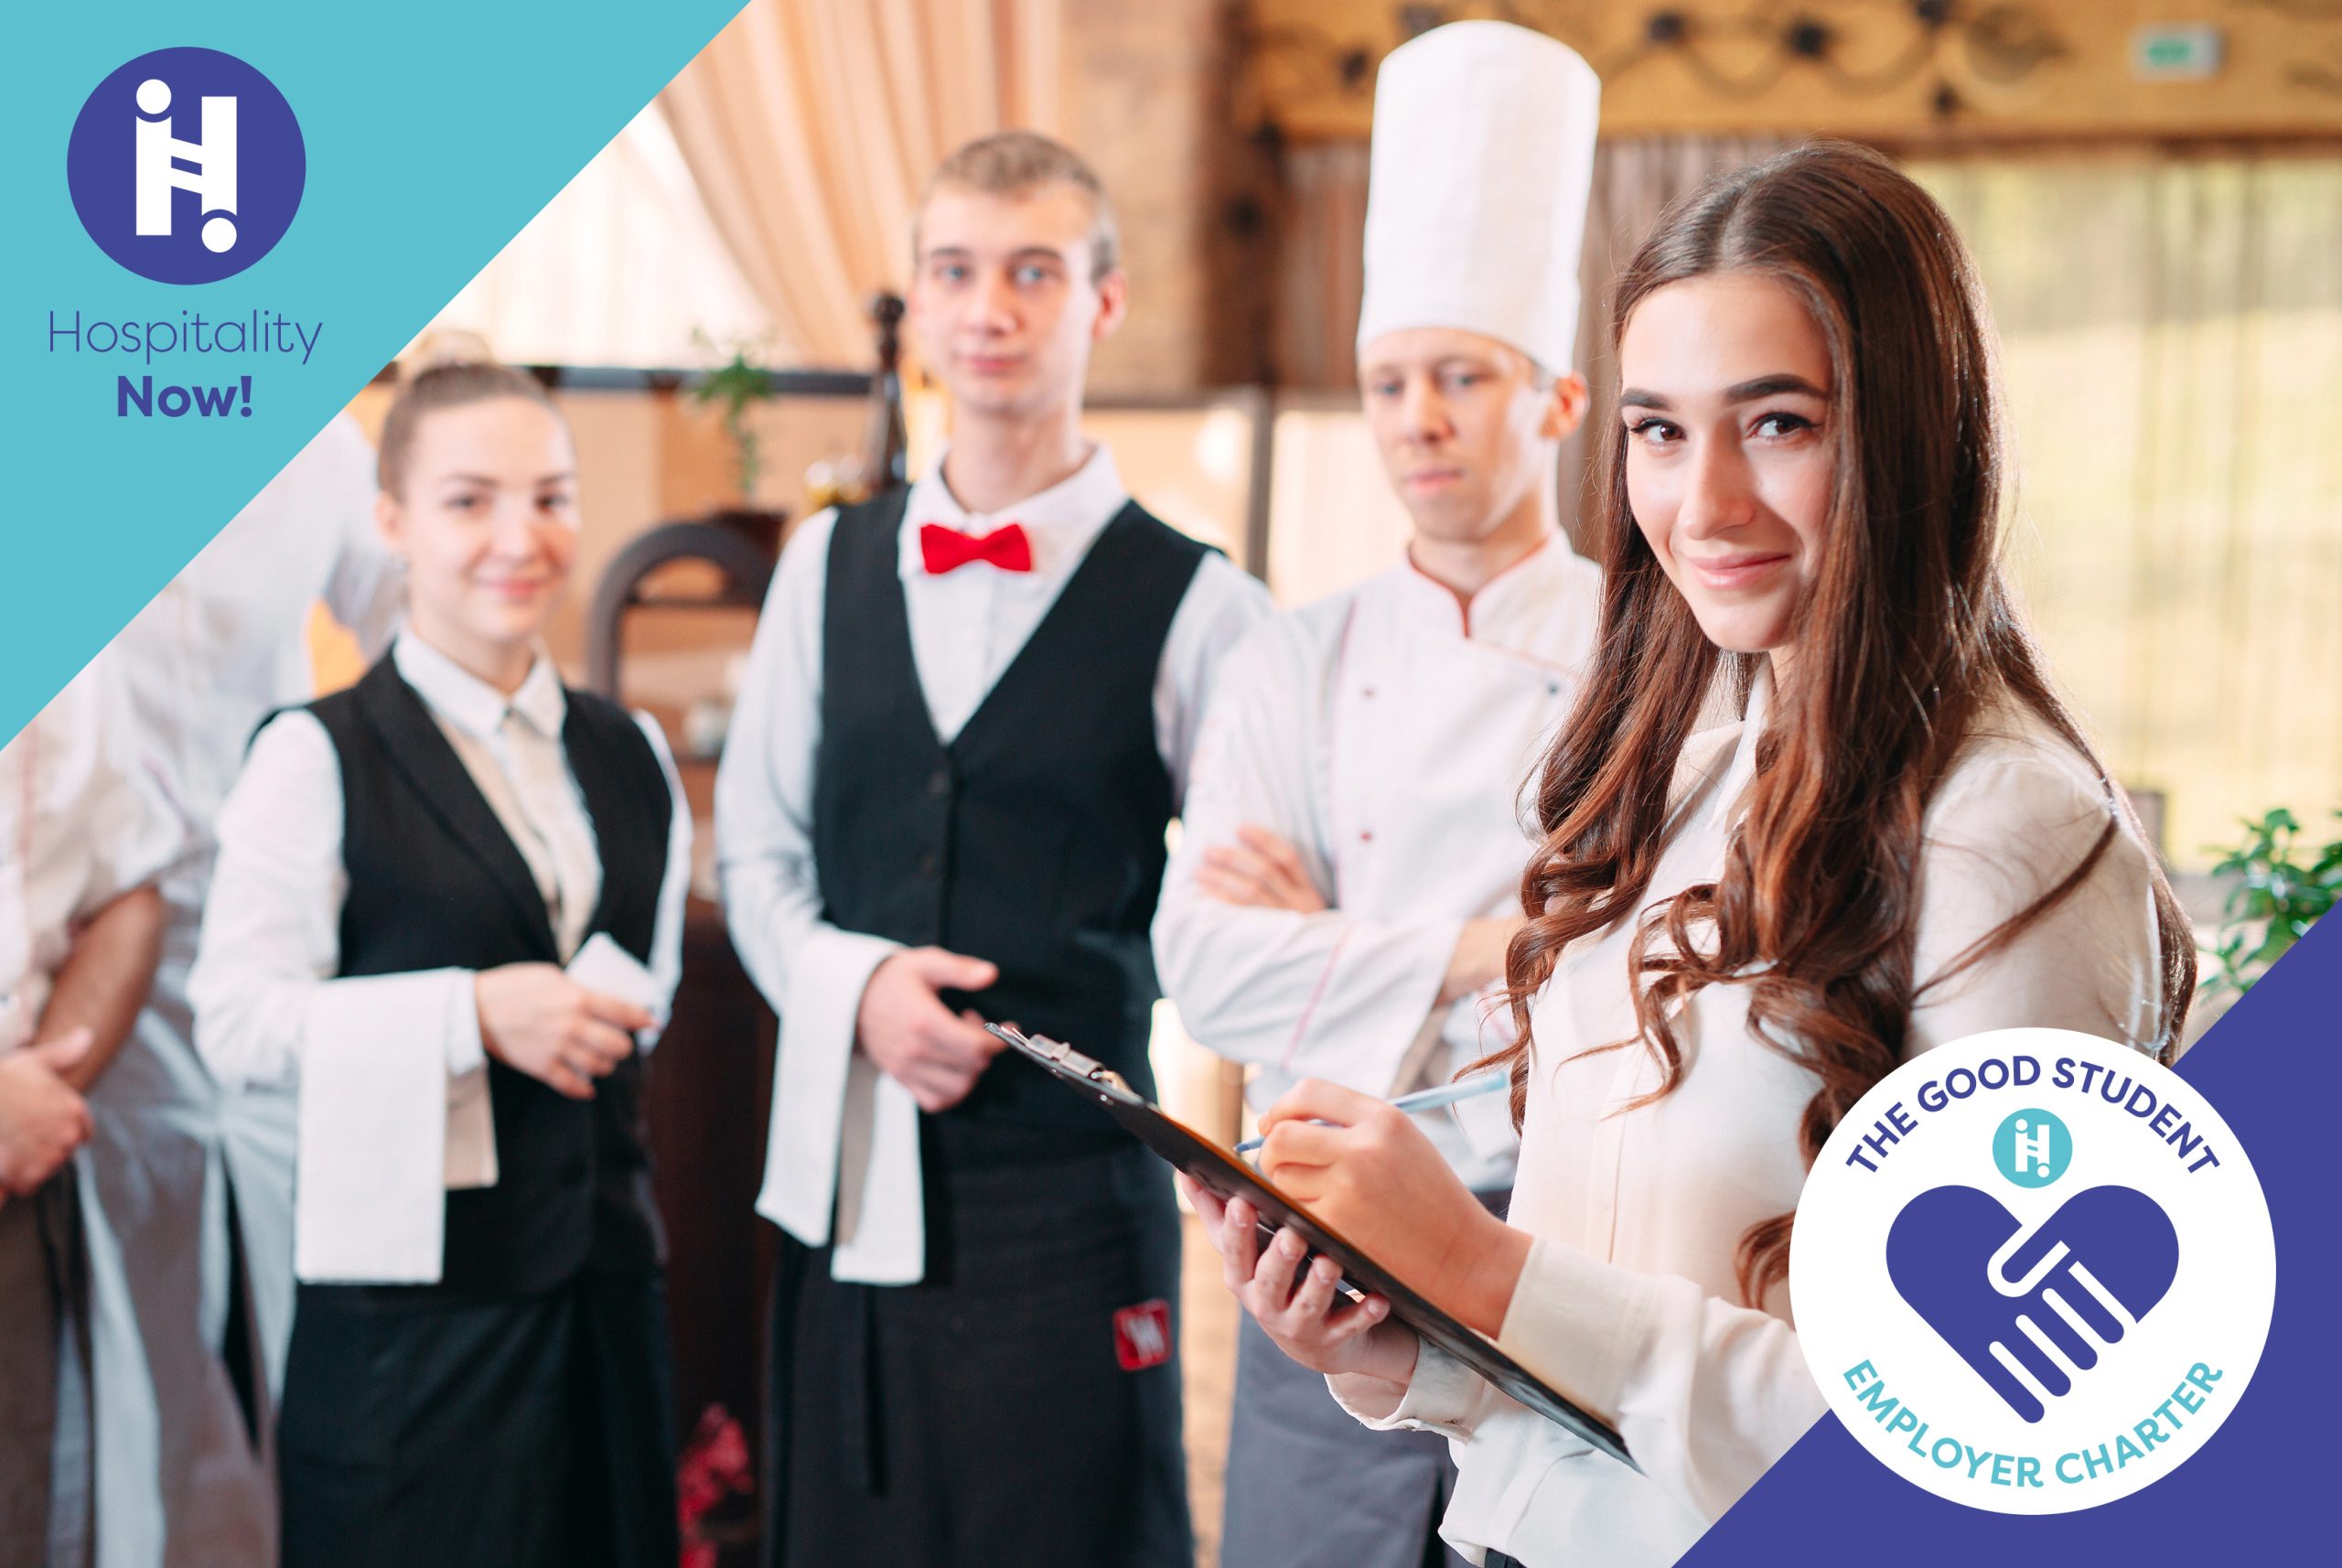 Students working in various roles within the hospitality sector